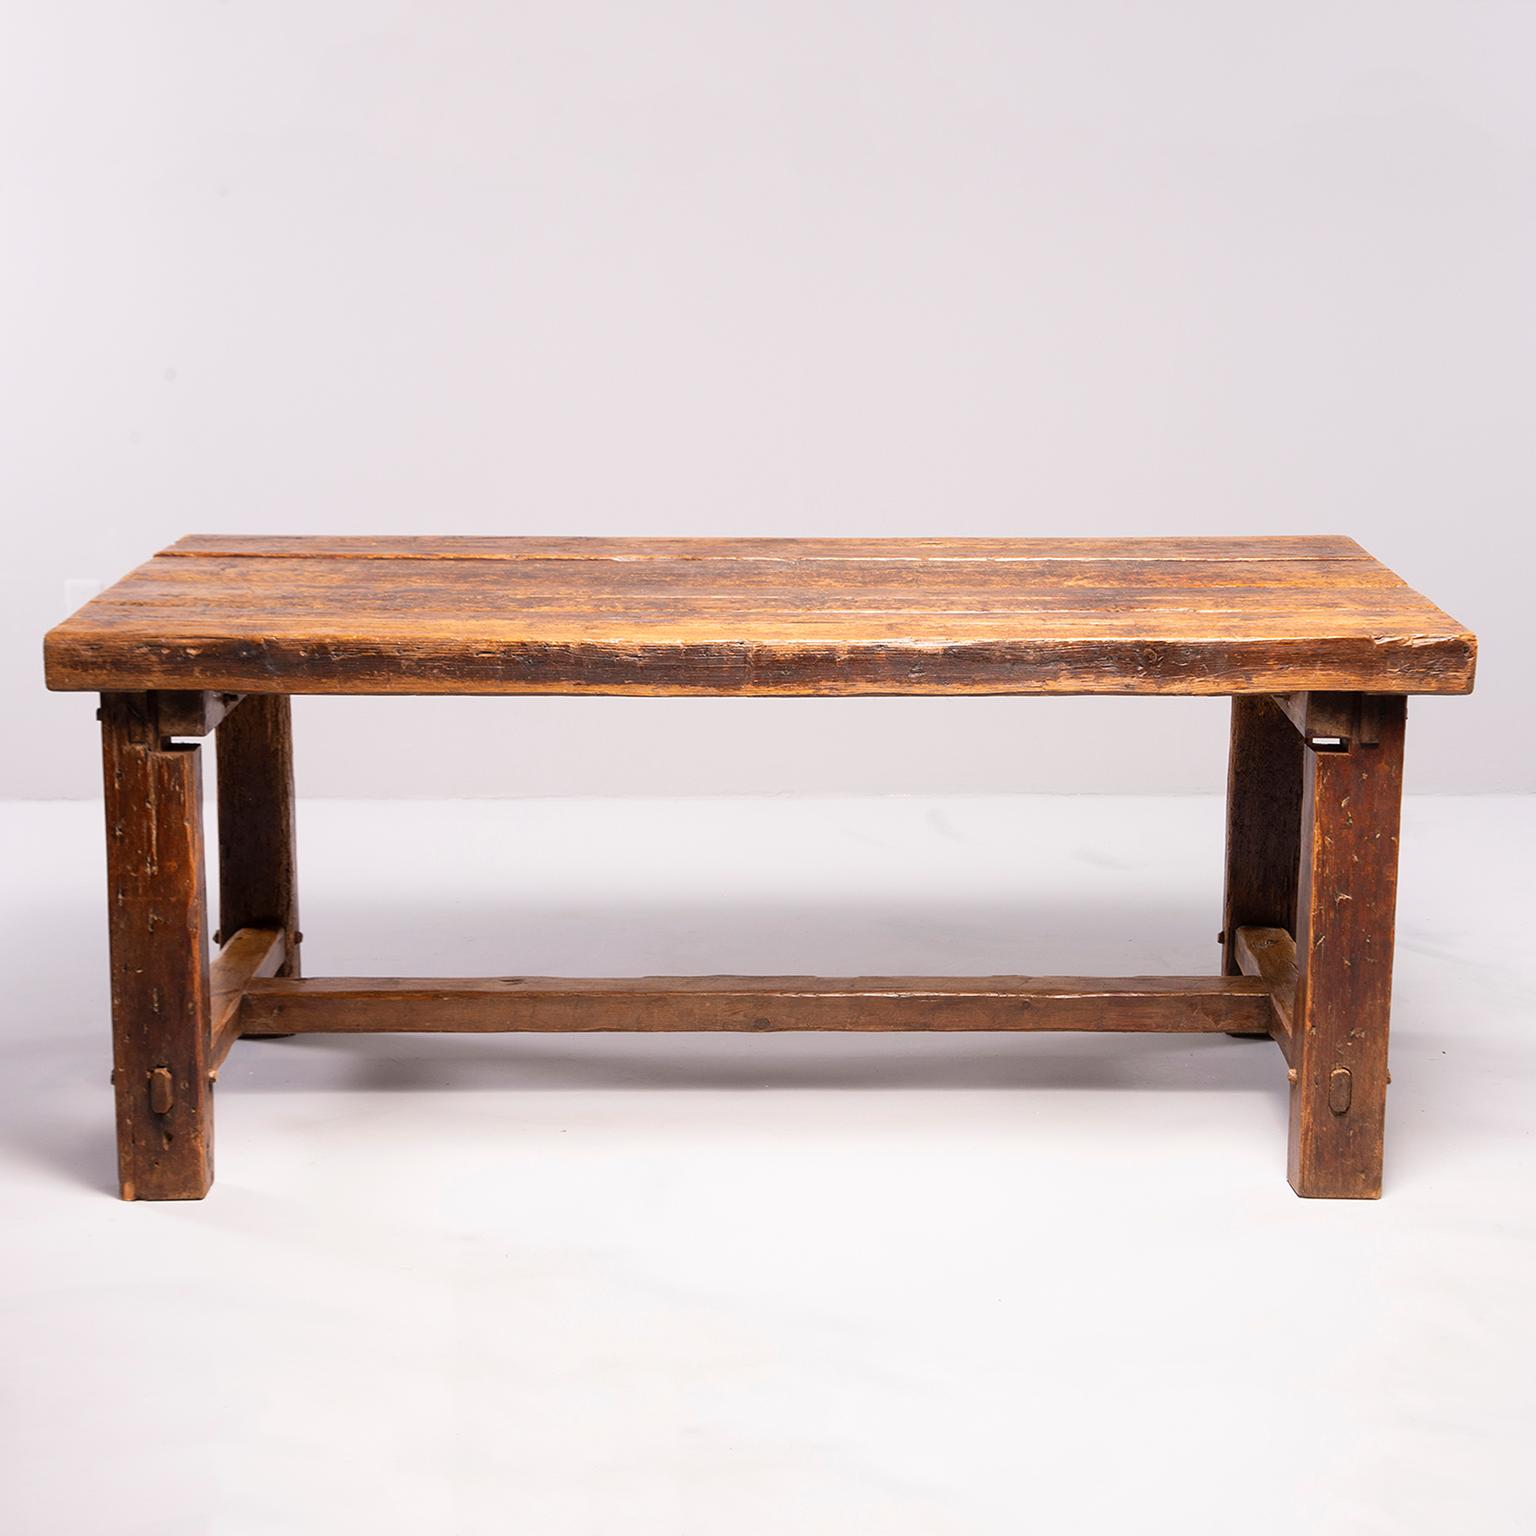 Early 19th Century French Rustic Table (Eichenholz)